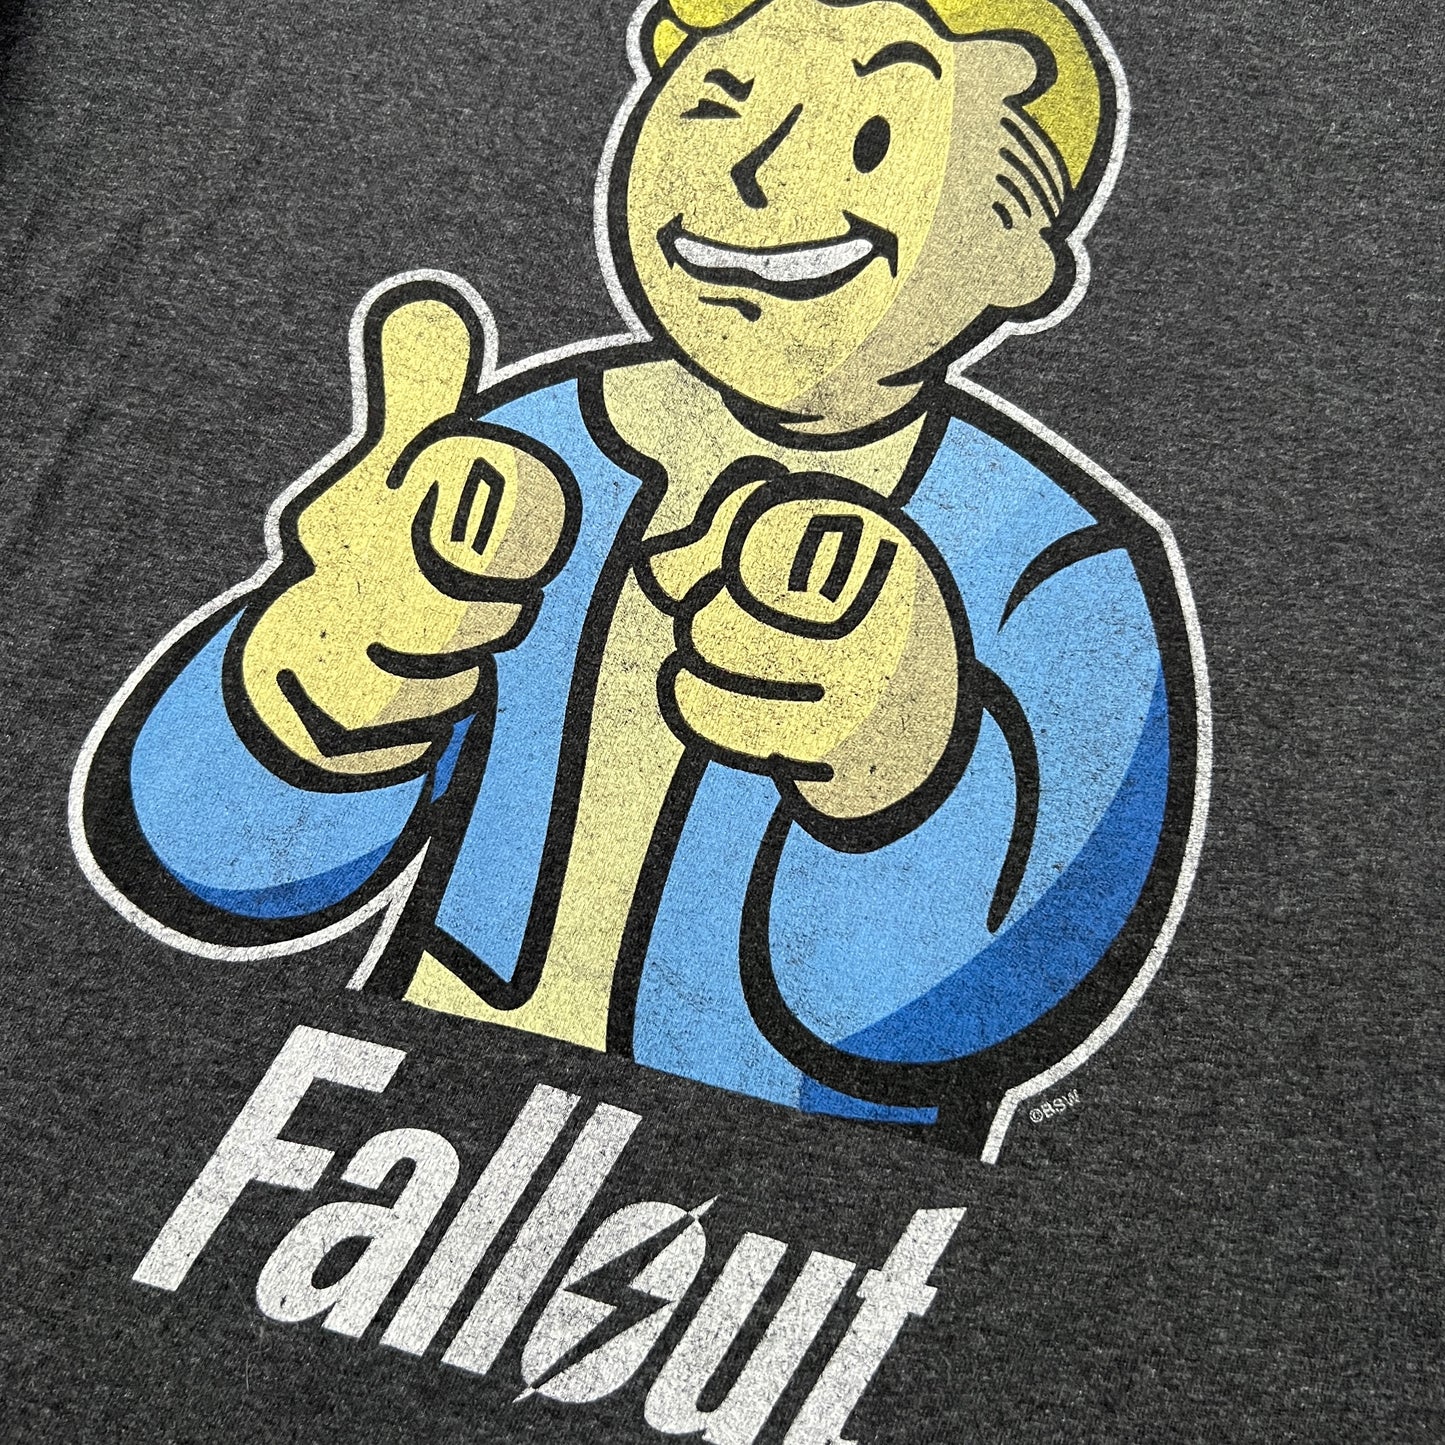 Pre-Owned Fallout T-Shirt Bundle